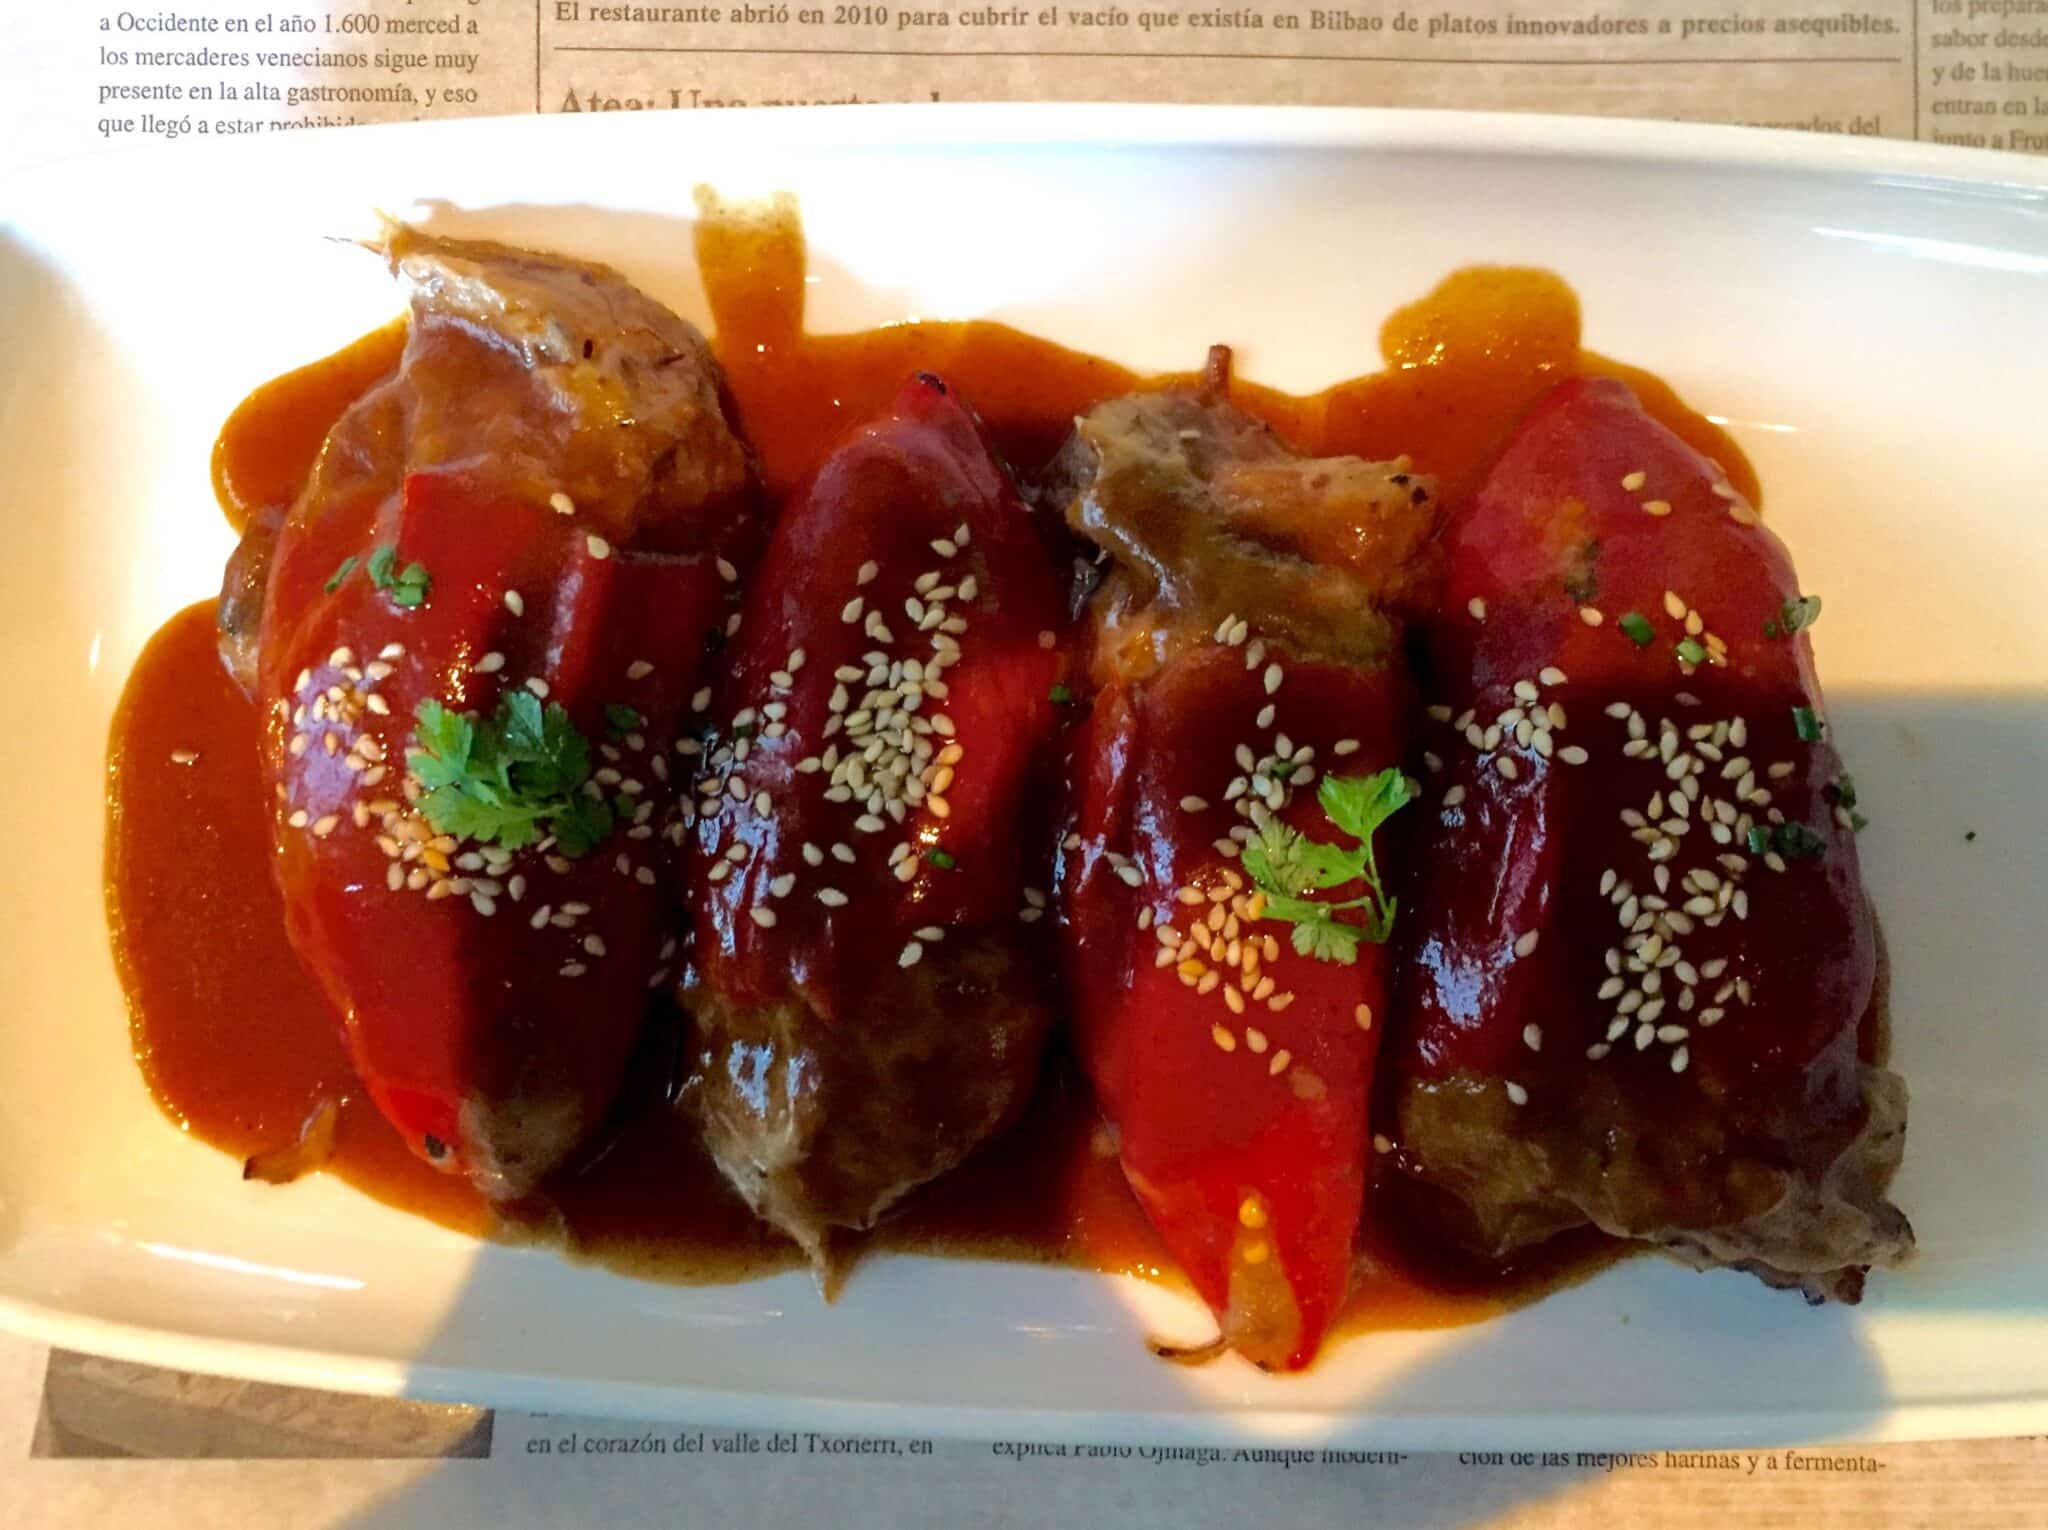 Oxtail-stuffed peppers at Atea in Bilbao